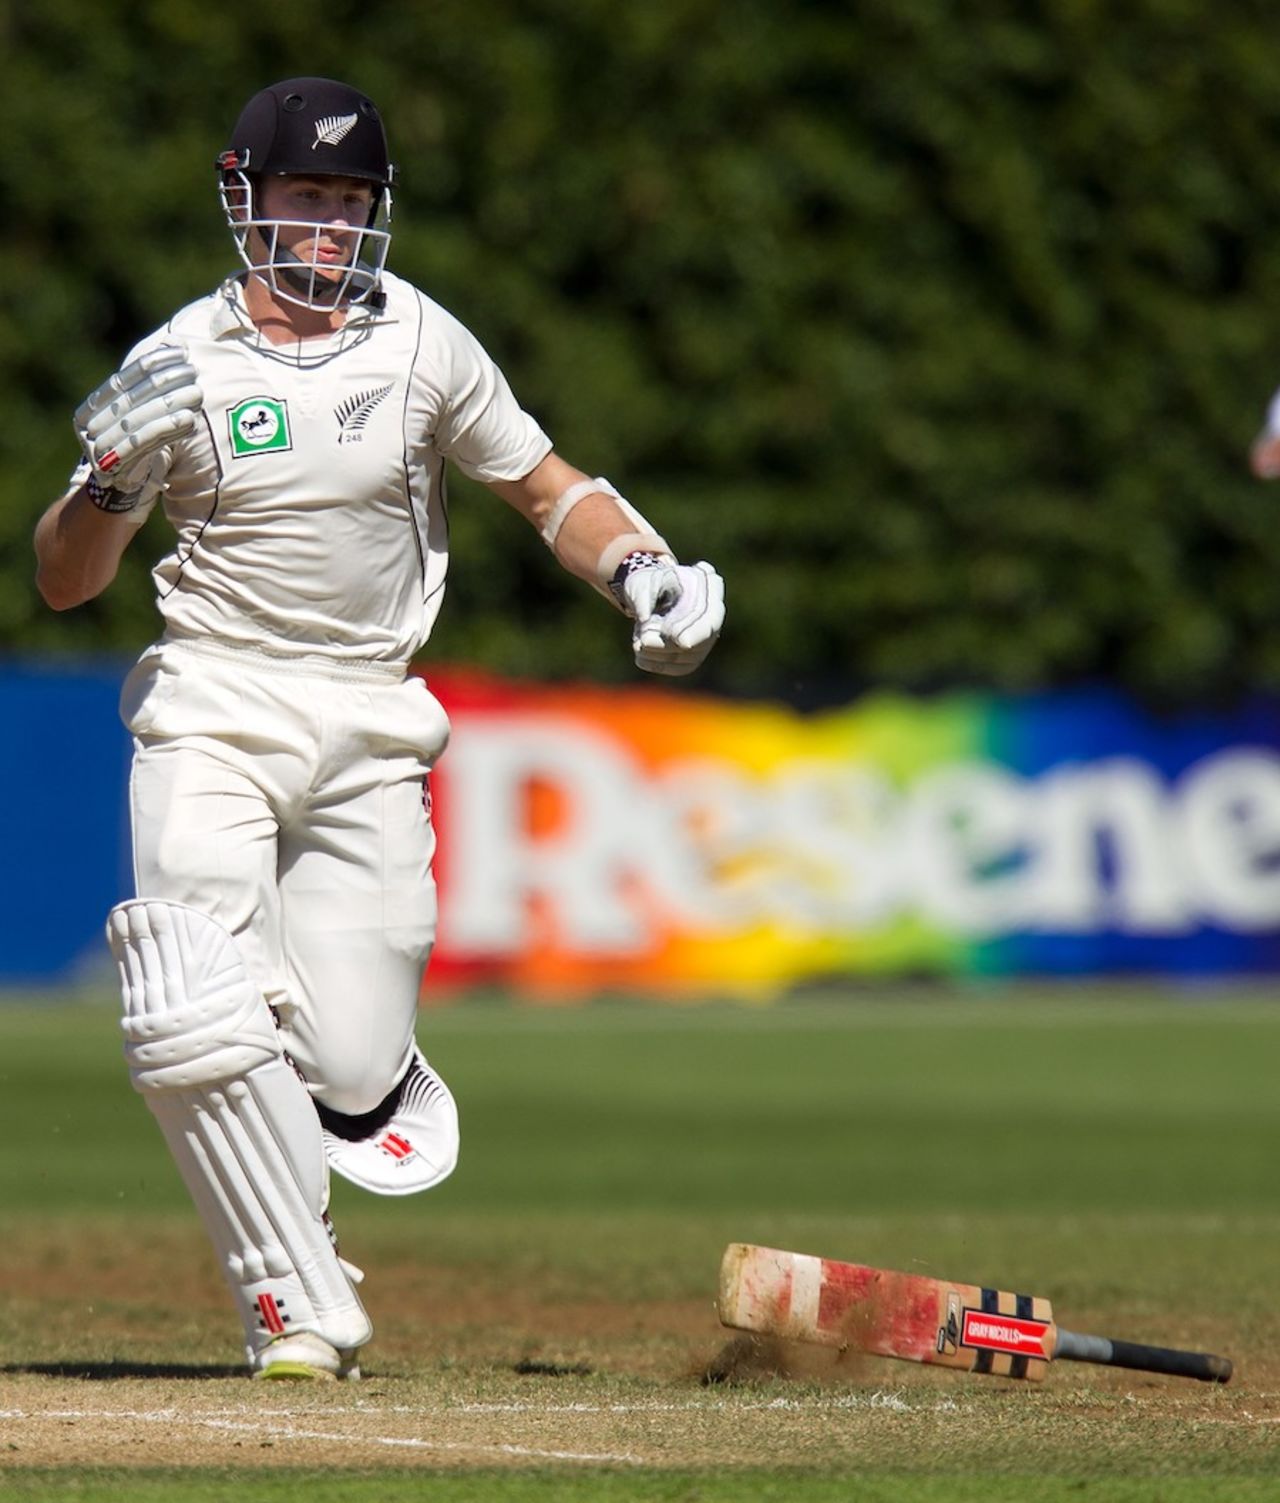 Kane Williamson drops his bat while running, New Zealand v South Africa, 3rd Test, Wellington, 5th day, March 27, 2012